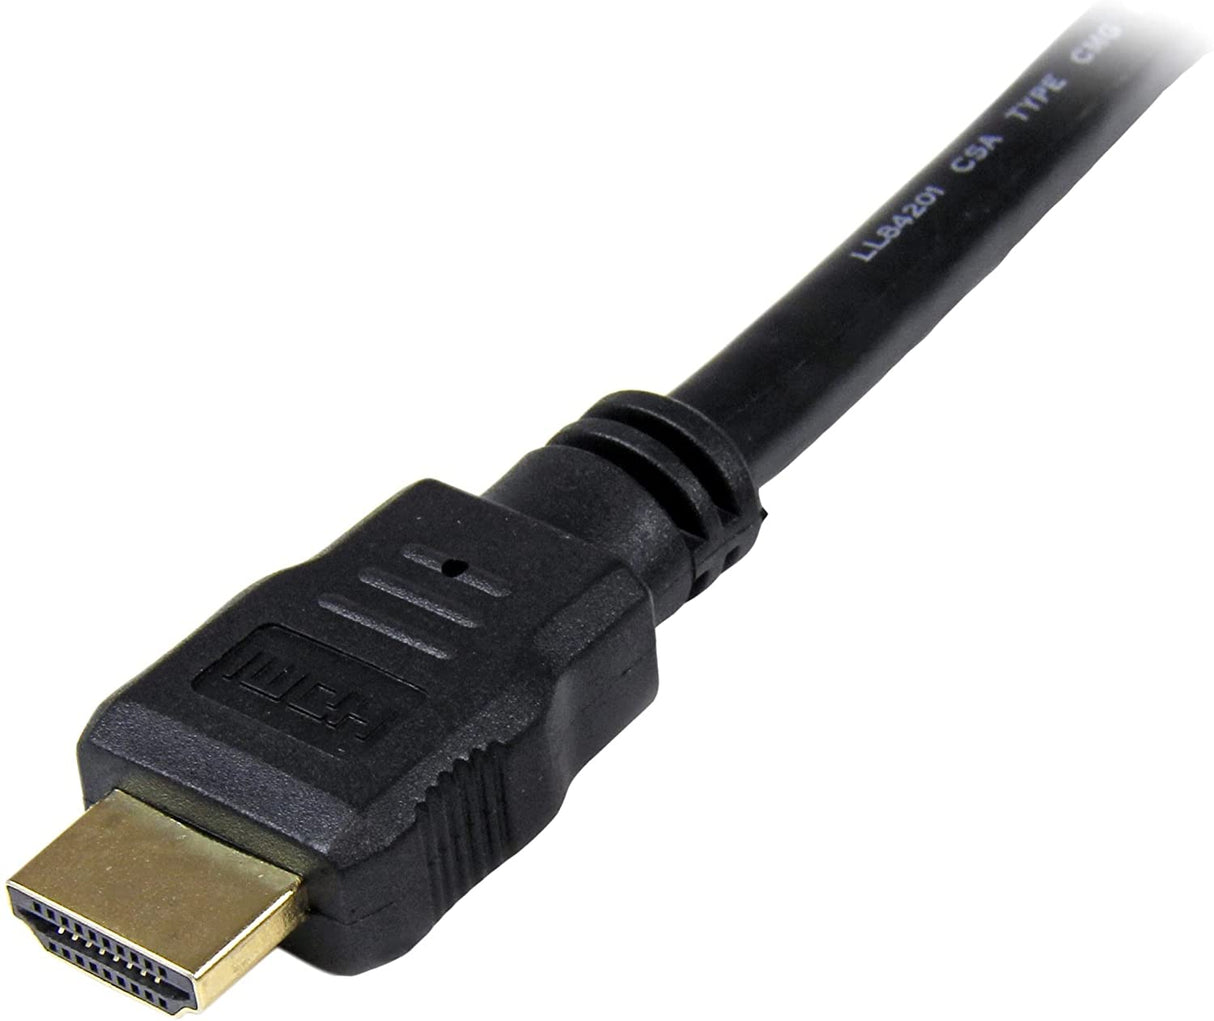 StarTech.com 15ft (4.6m) HDMI Cable - 4K High Speed HDMI Cable with Ethernet - UHD 4K 30Hz Video - HDMI 1.4 Cable - Ultra HD HDMI Monitors, Projectors, TVs &amp; Displays - Black HDMI Cord - M/M (HDMM15) 15 ft / 4.5m